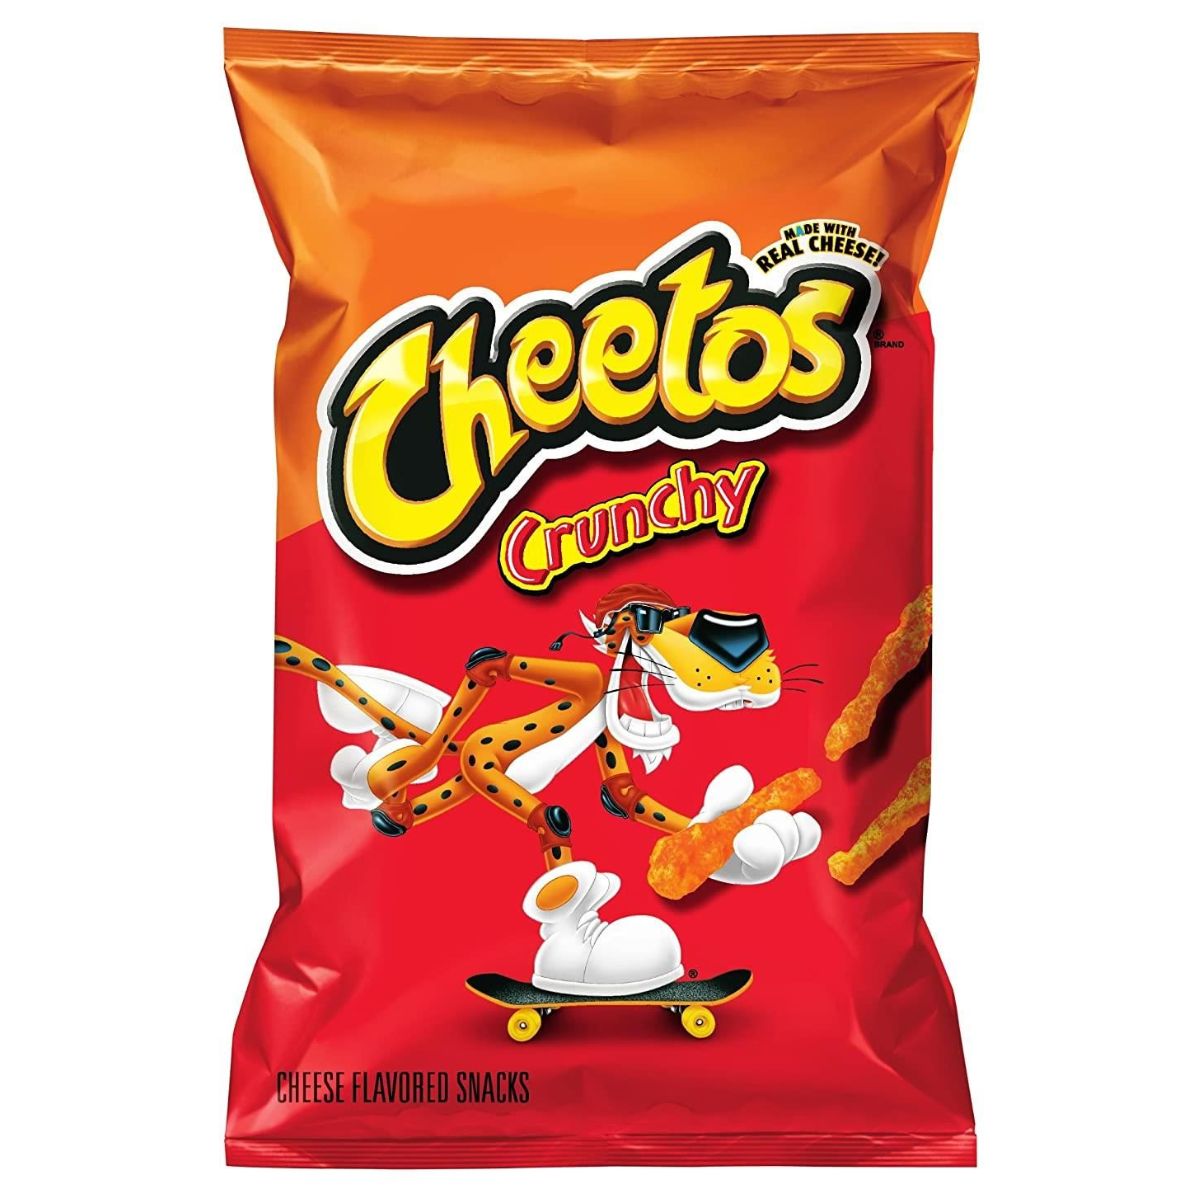 Cheetos Crunchy 226.8g snack bag with a skateboard on it.